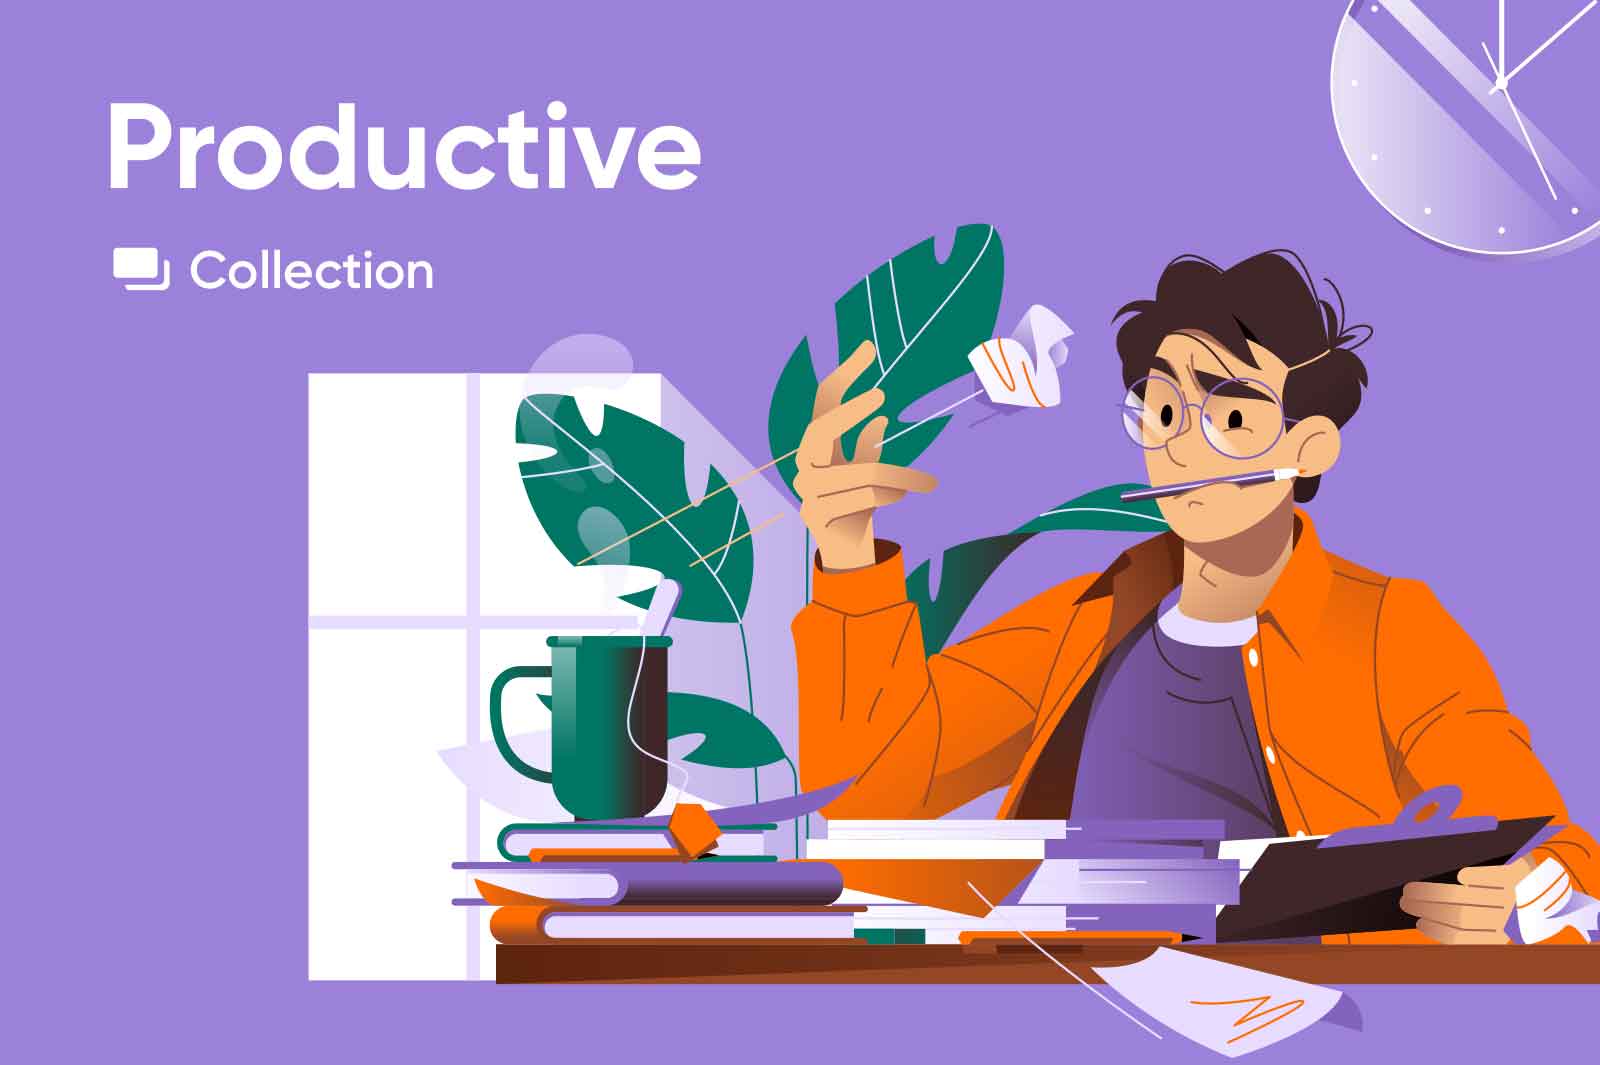 A set of illustrations about working efficiently and productively, streamline tasks, a well-organized workspace, and a balance of focus and breaks. The illustrations convey a sense of purpose and motivation.